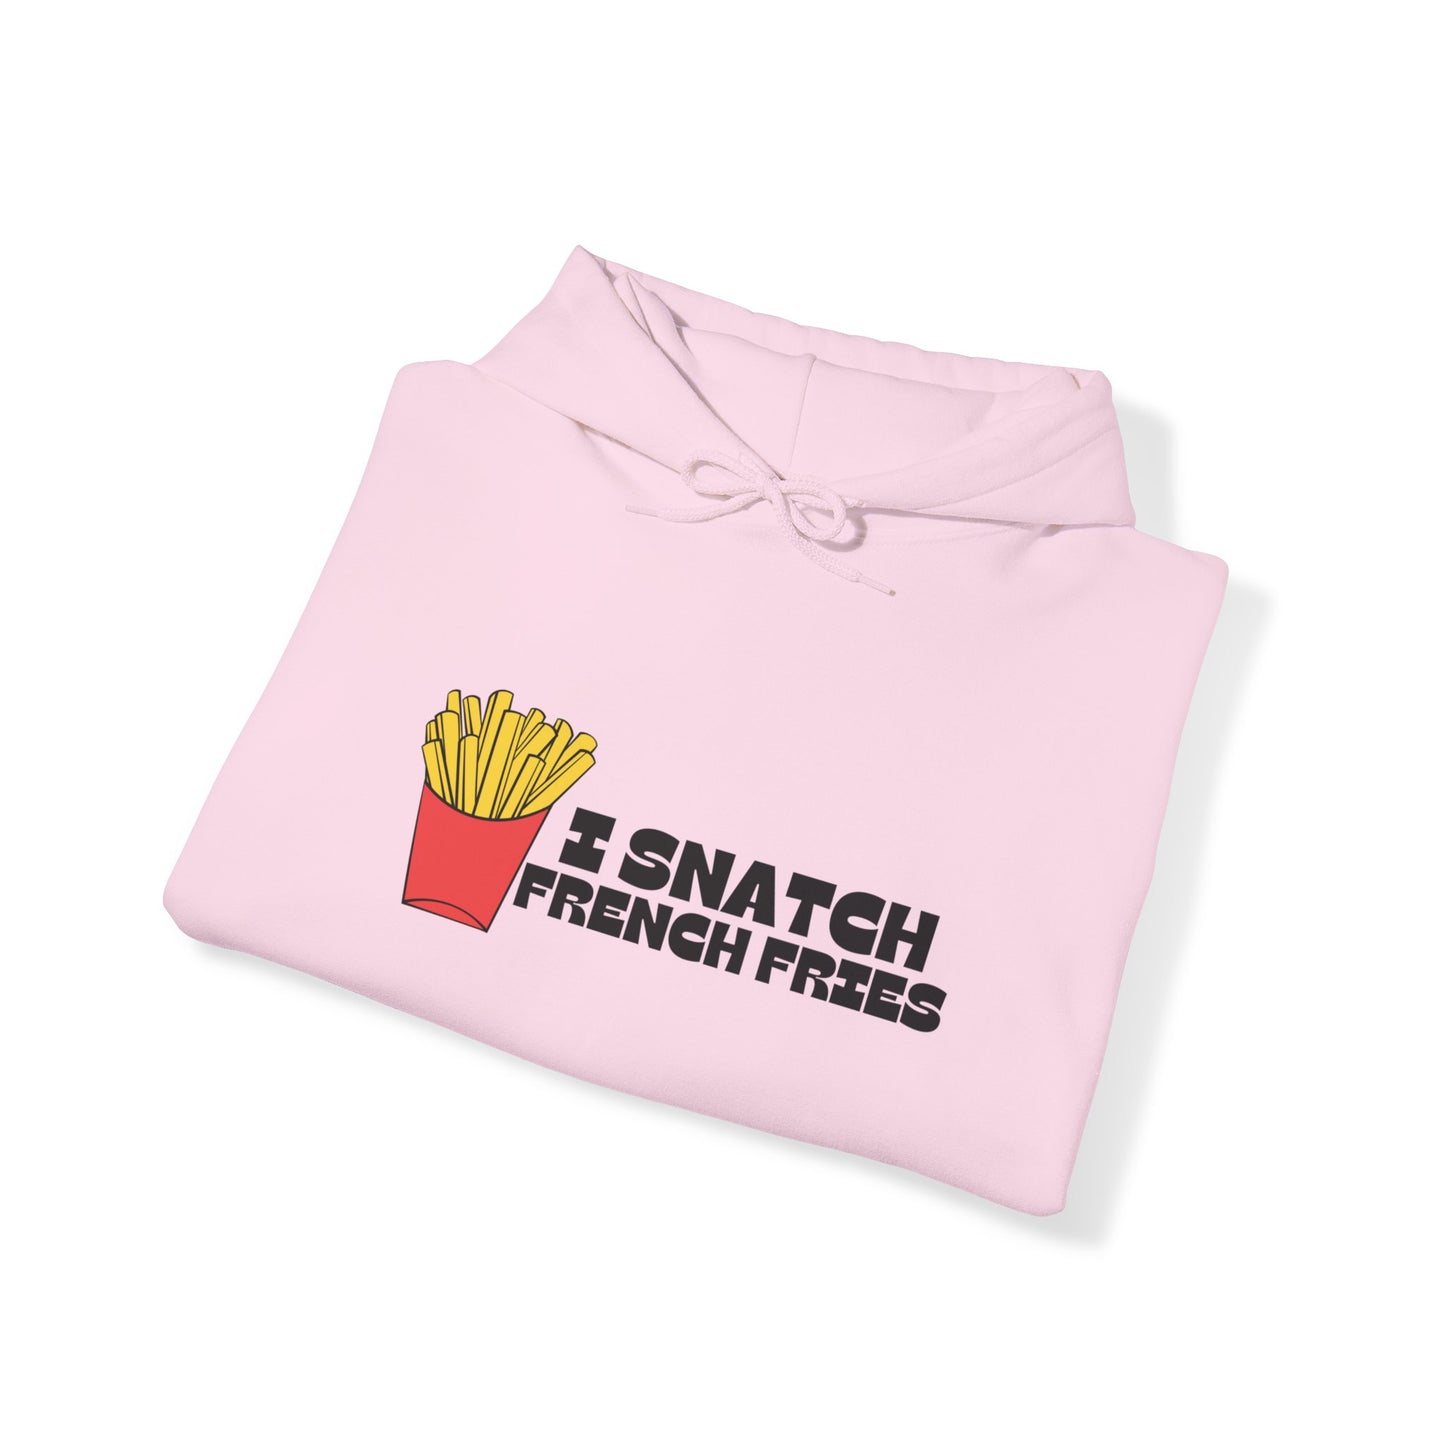 I Snatch French Fries Hoodie